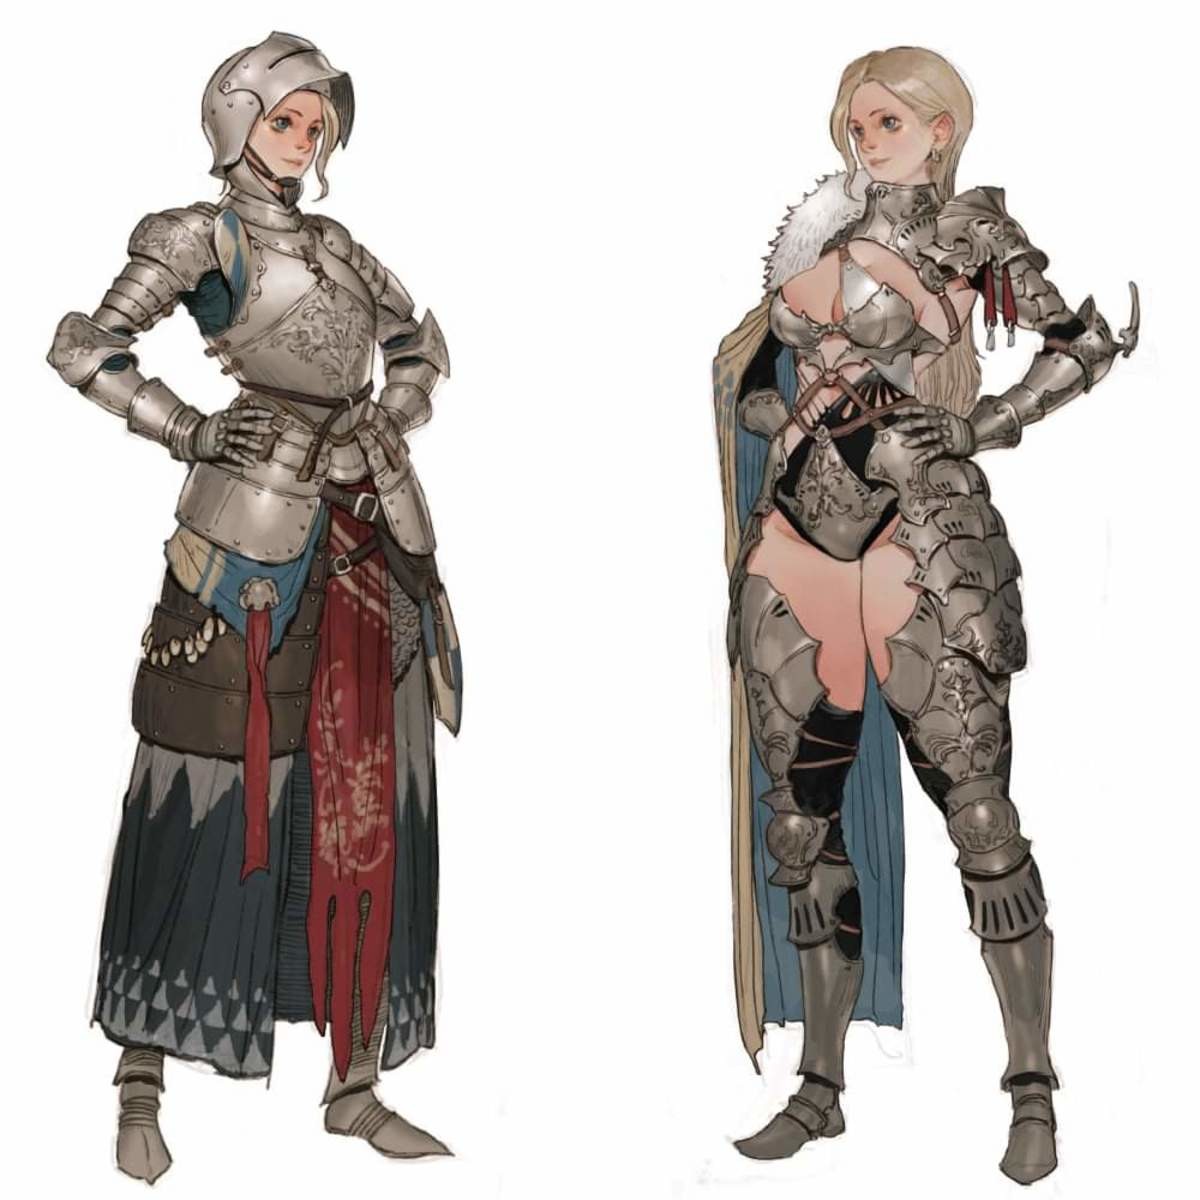 The duality of armor. .. One of the best things about Dark Souls is forgetting your character's sex until you die and hear her agonizing screams/his sensual moans.